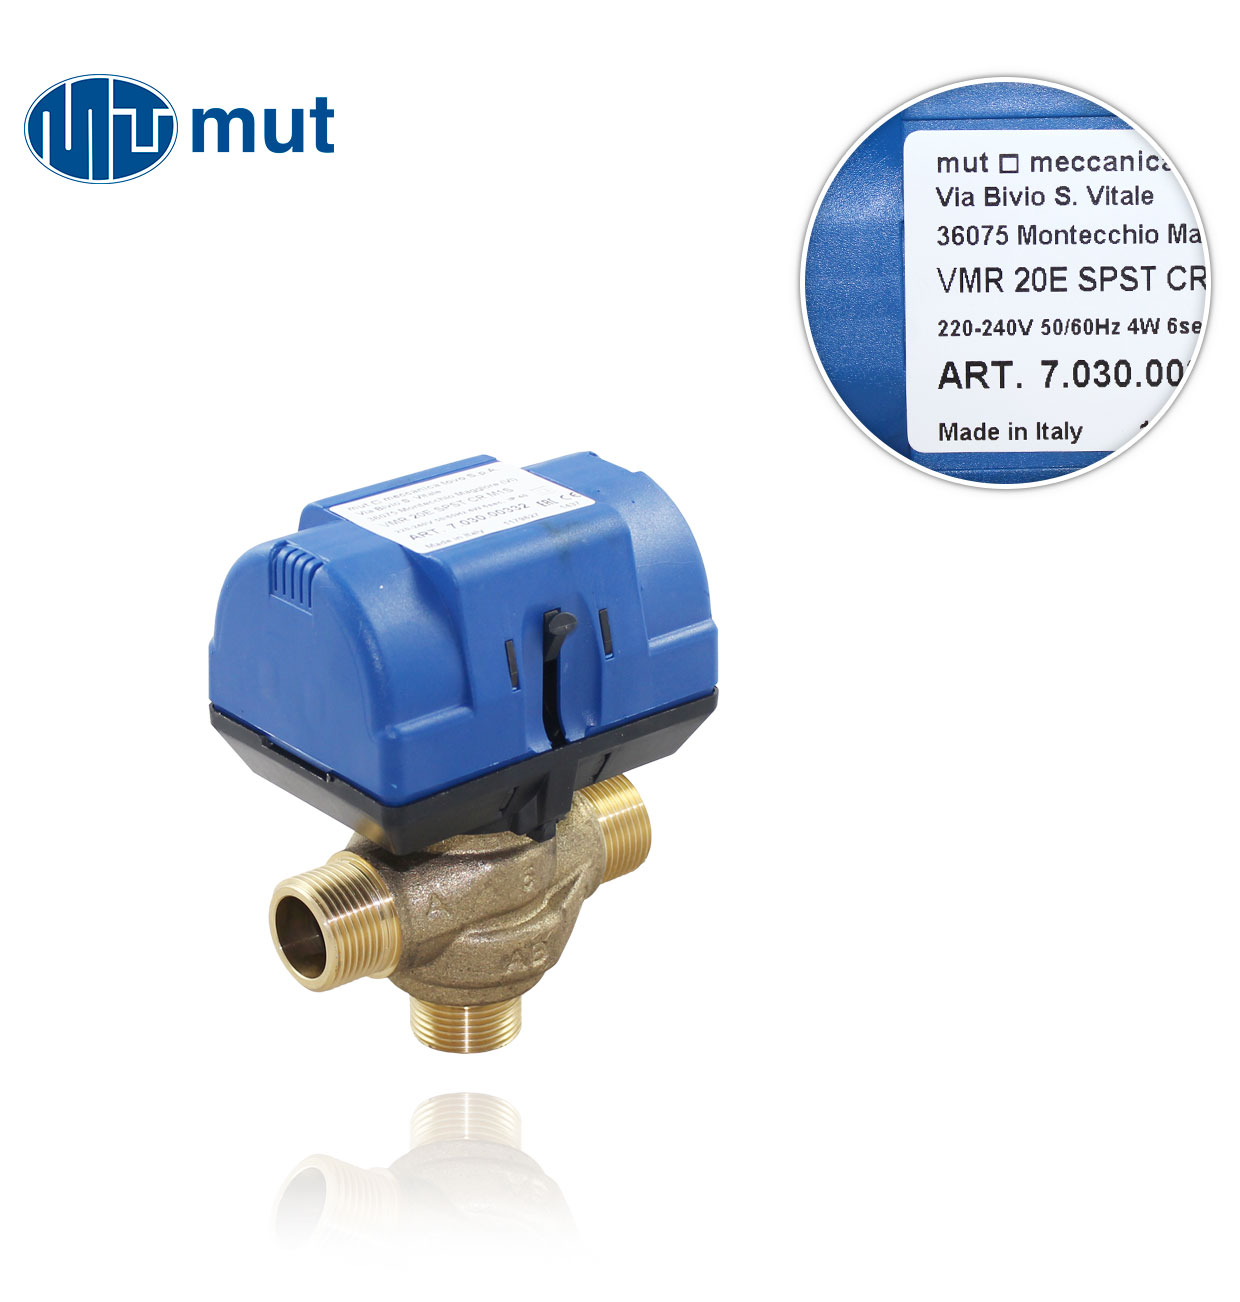 VMR 20 E SPST CR M1S 230V 3/4"MMM wireless ZONE VALVE with MUT microswitch